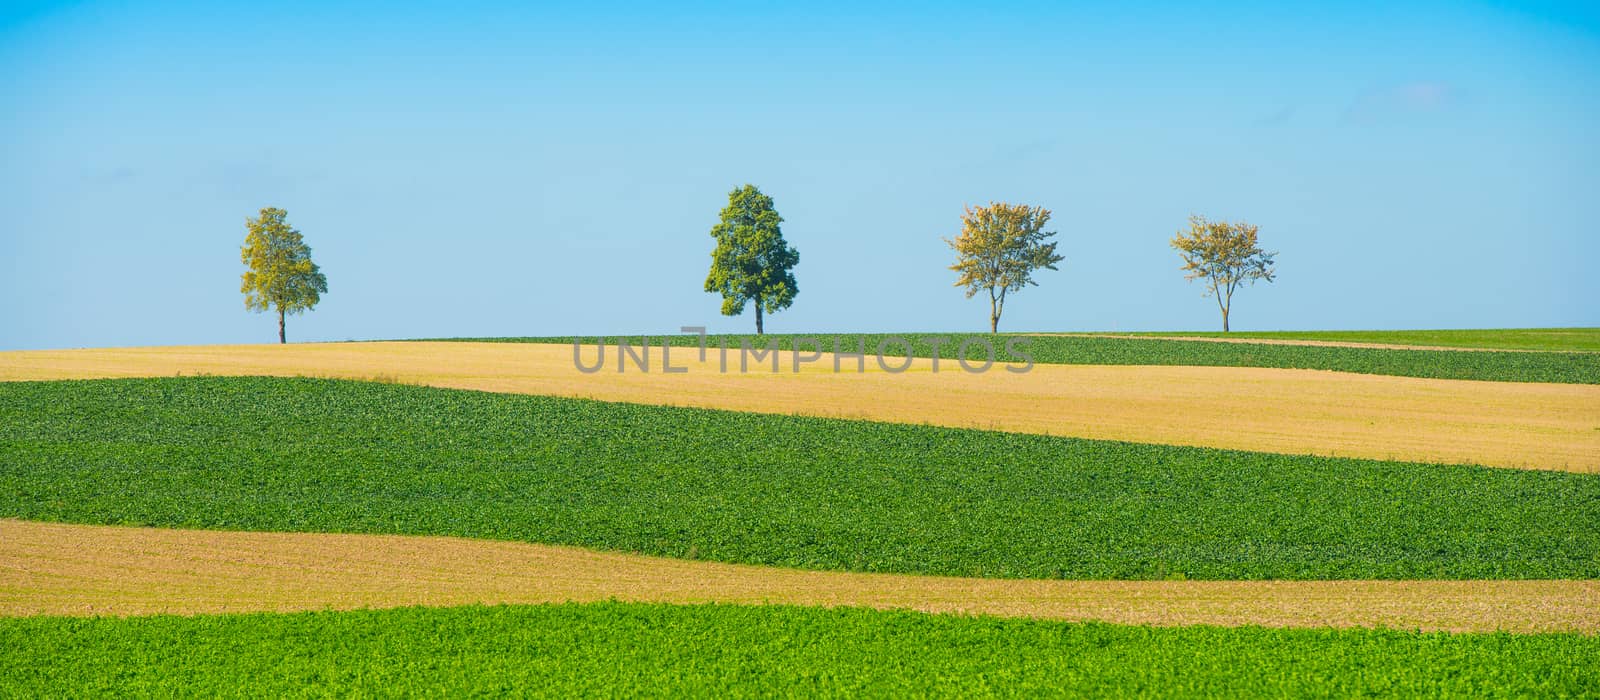 Green trees in a fields on blue sky, Champagne, France by FreeProd